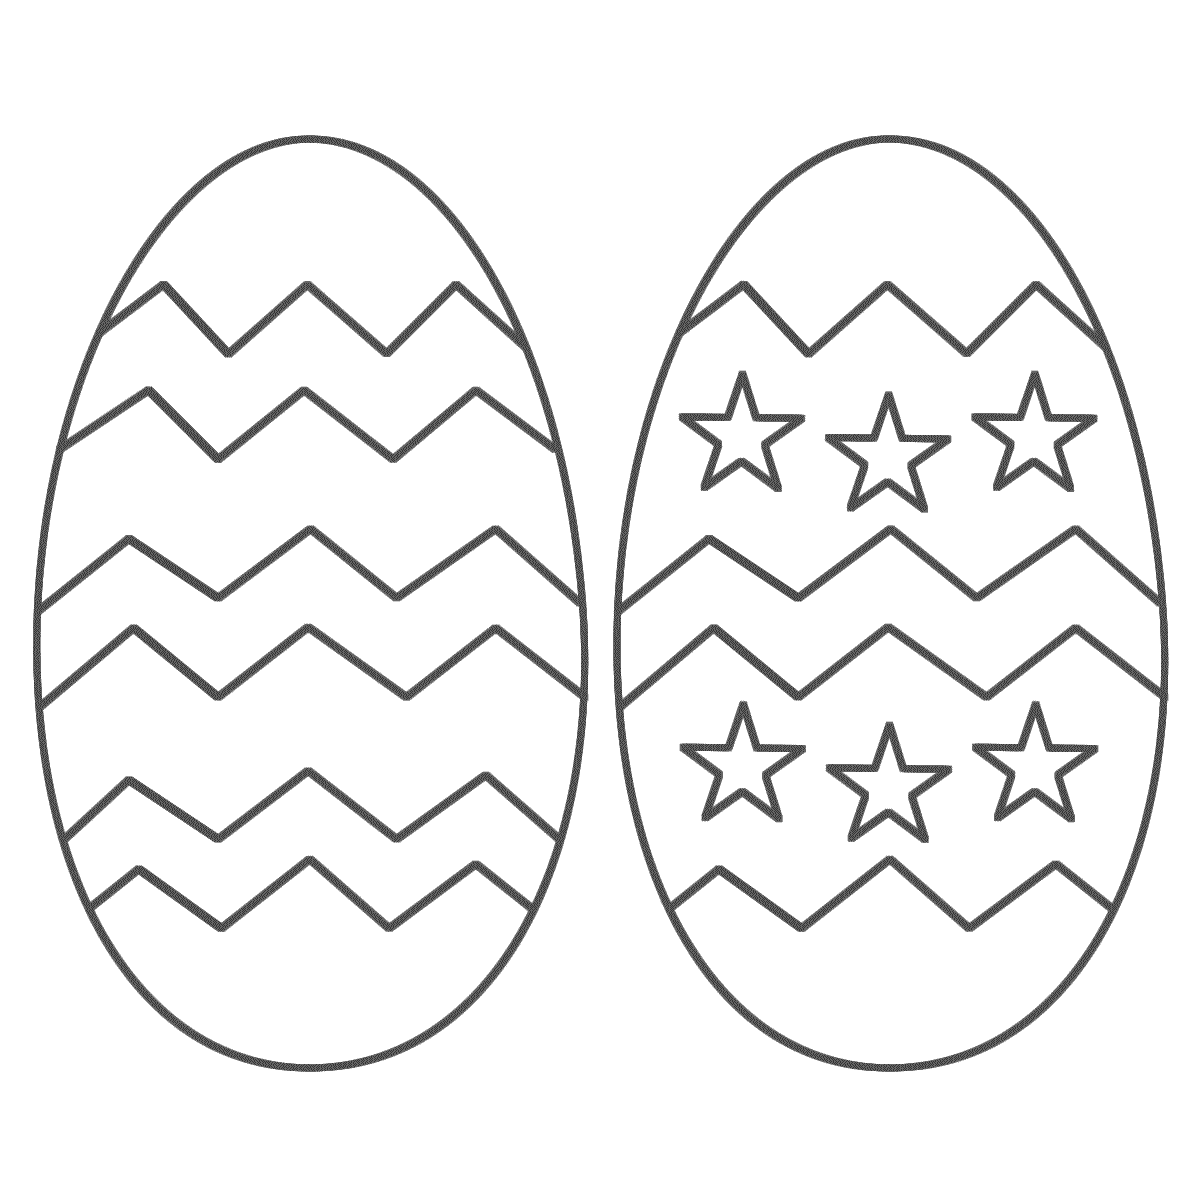 Of Easter Eggs - Coloring Pages for Kids and for Adults